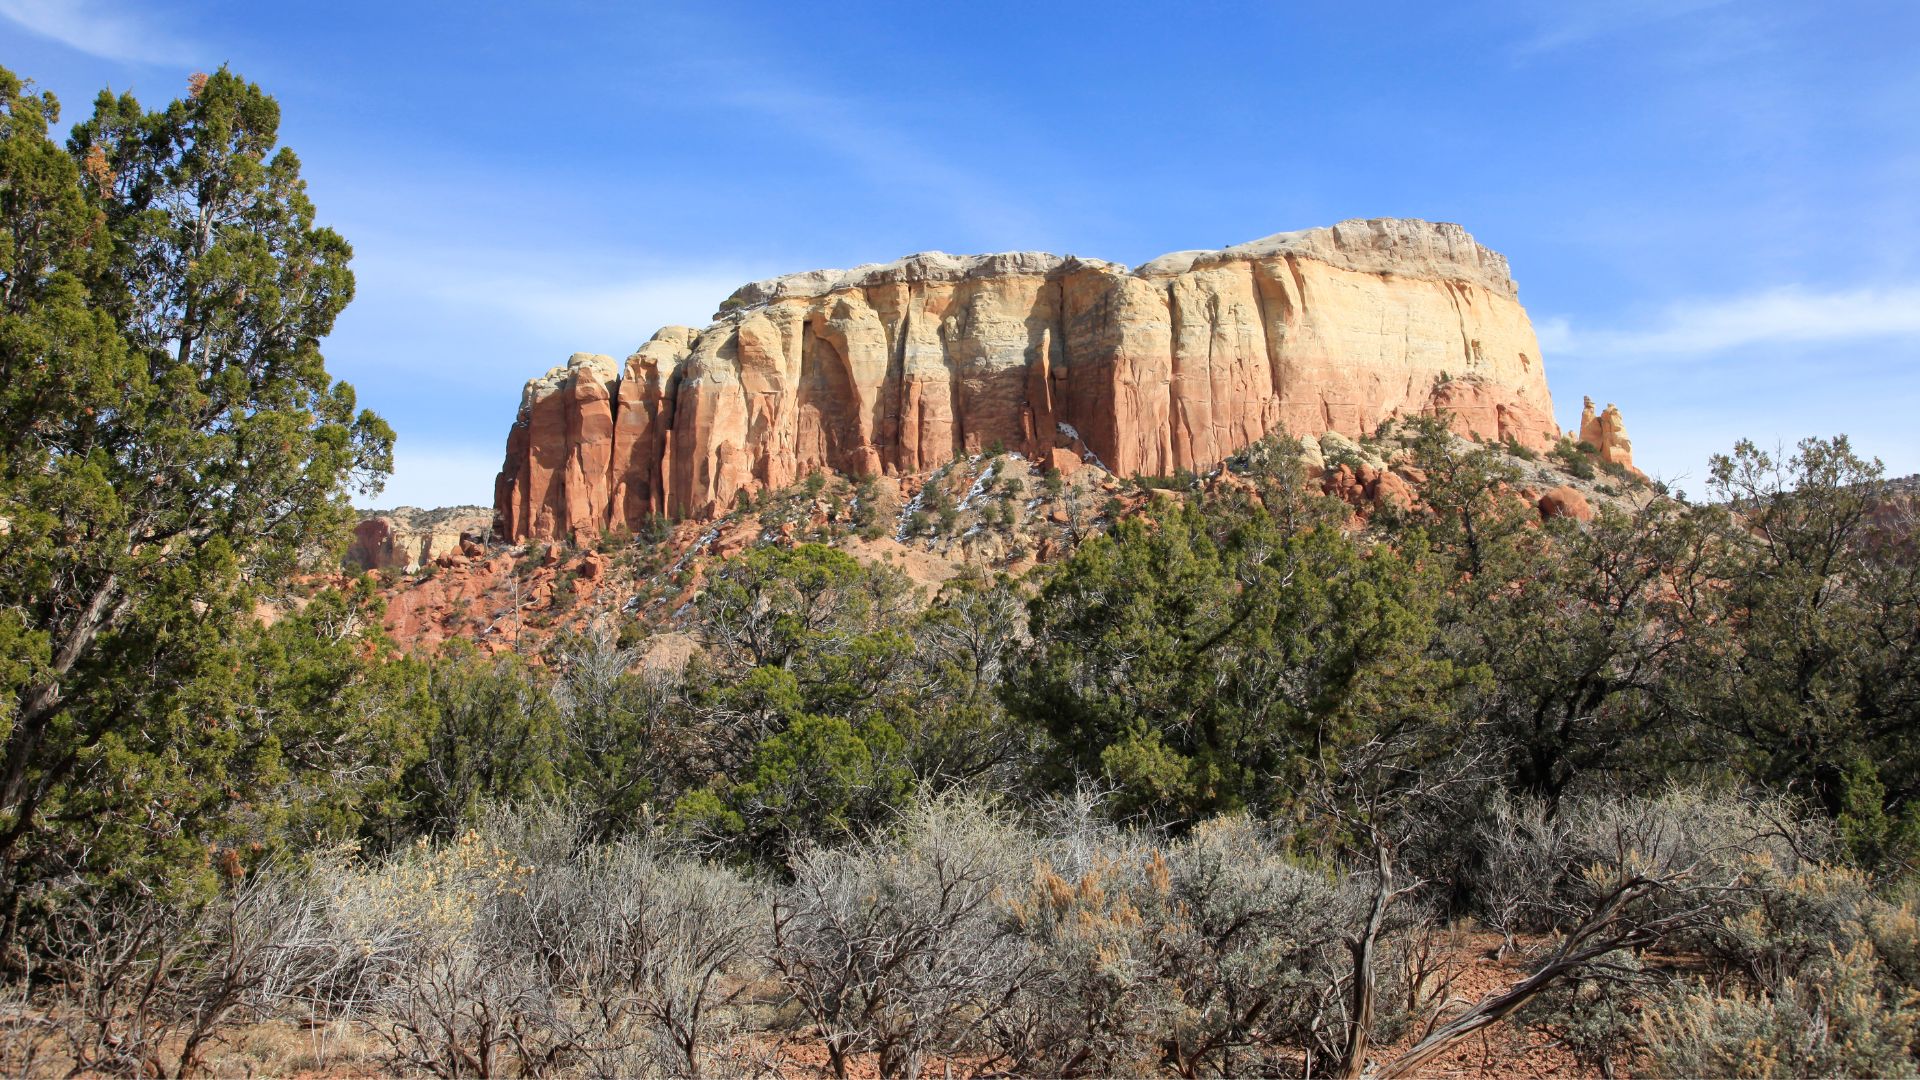 Kitchen Mesa is a tall, smooth-walled mesa of red rock surrounded by piñon juniper forest.